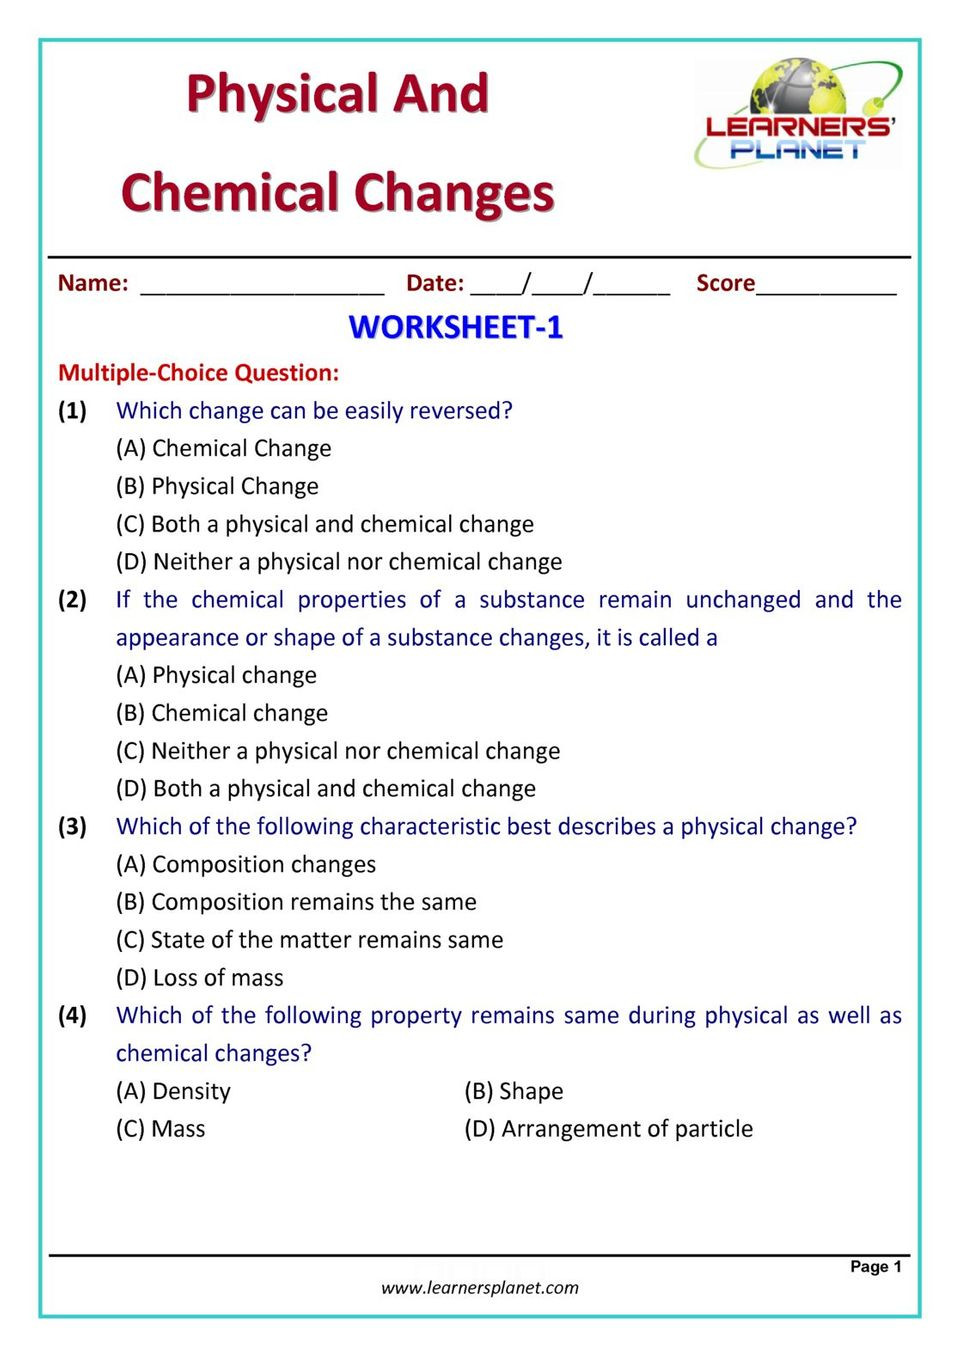 Physical and Chemical Changes Worksheet Grade 7 Science Olympiad Physical &amp; Chemical Changes Magazine